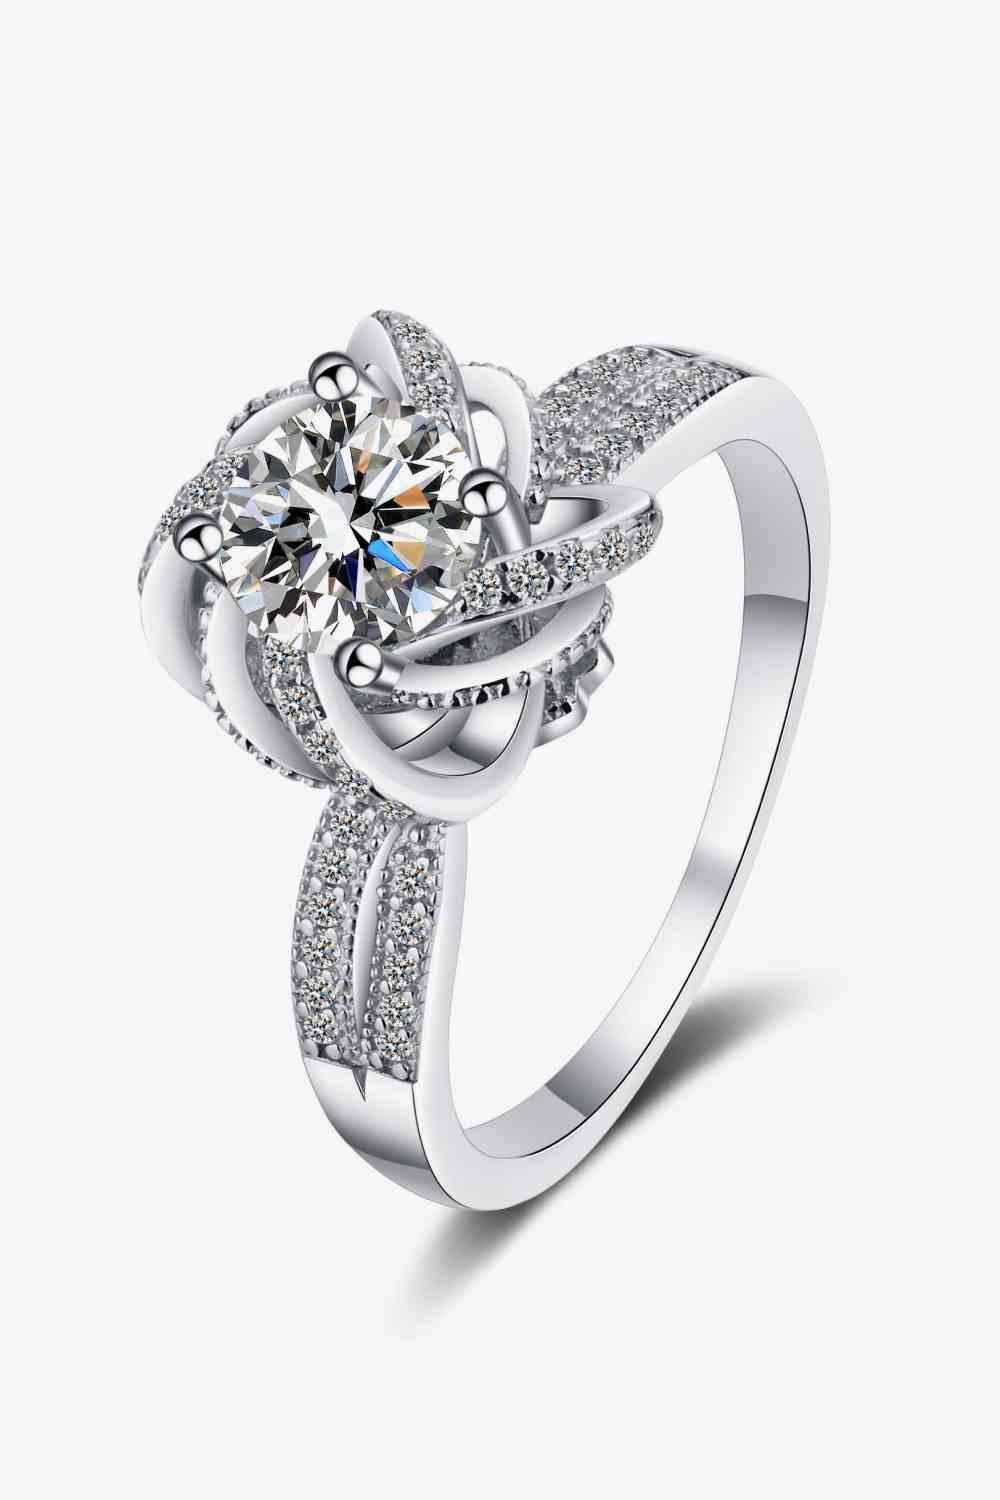 Ethereal Sparkle: 1 Carat Moissanite Ring